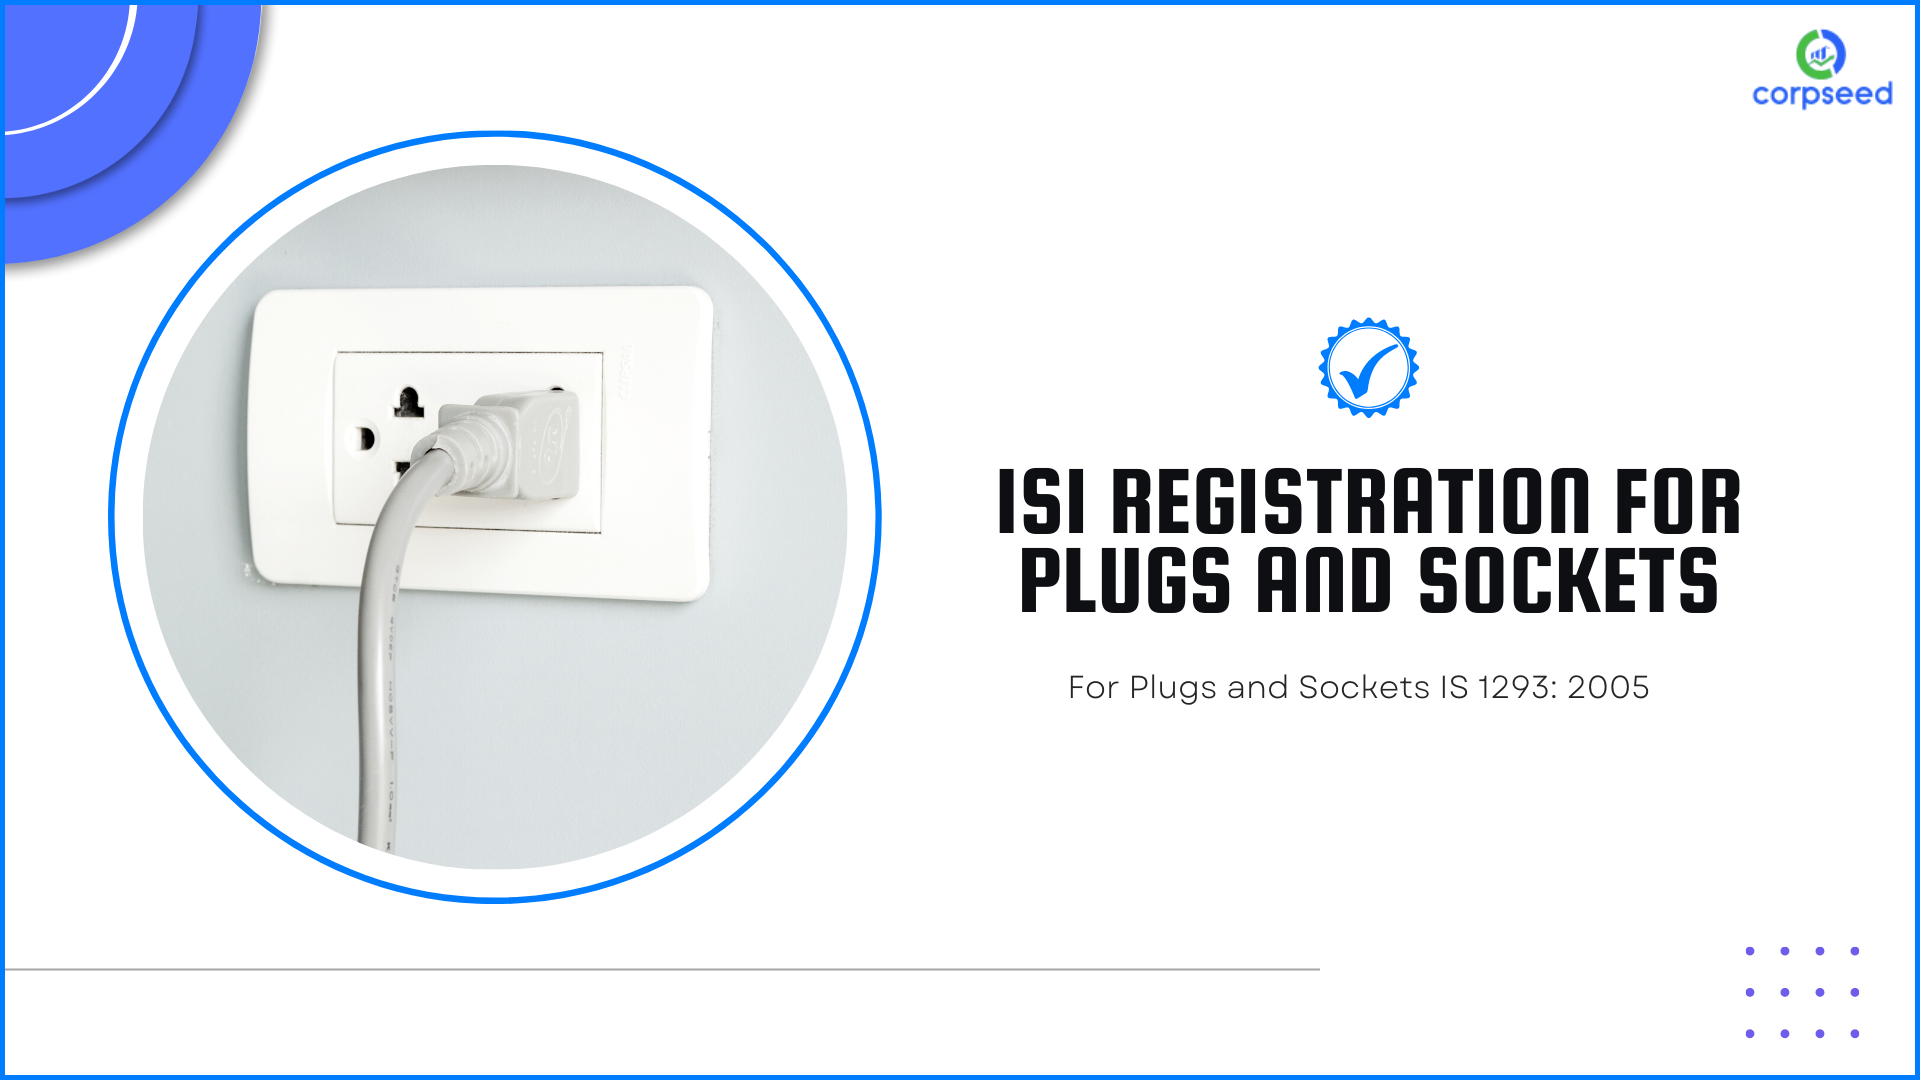 isi-registration-for-plugs-and-sockets-is-1293-2005_corpseed.png